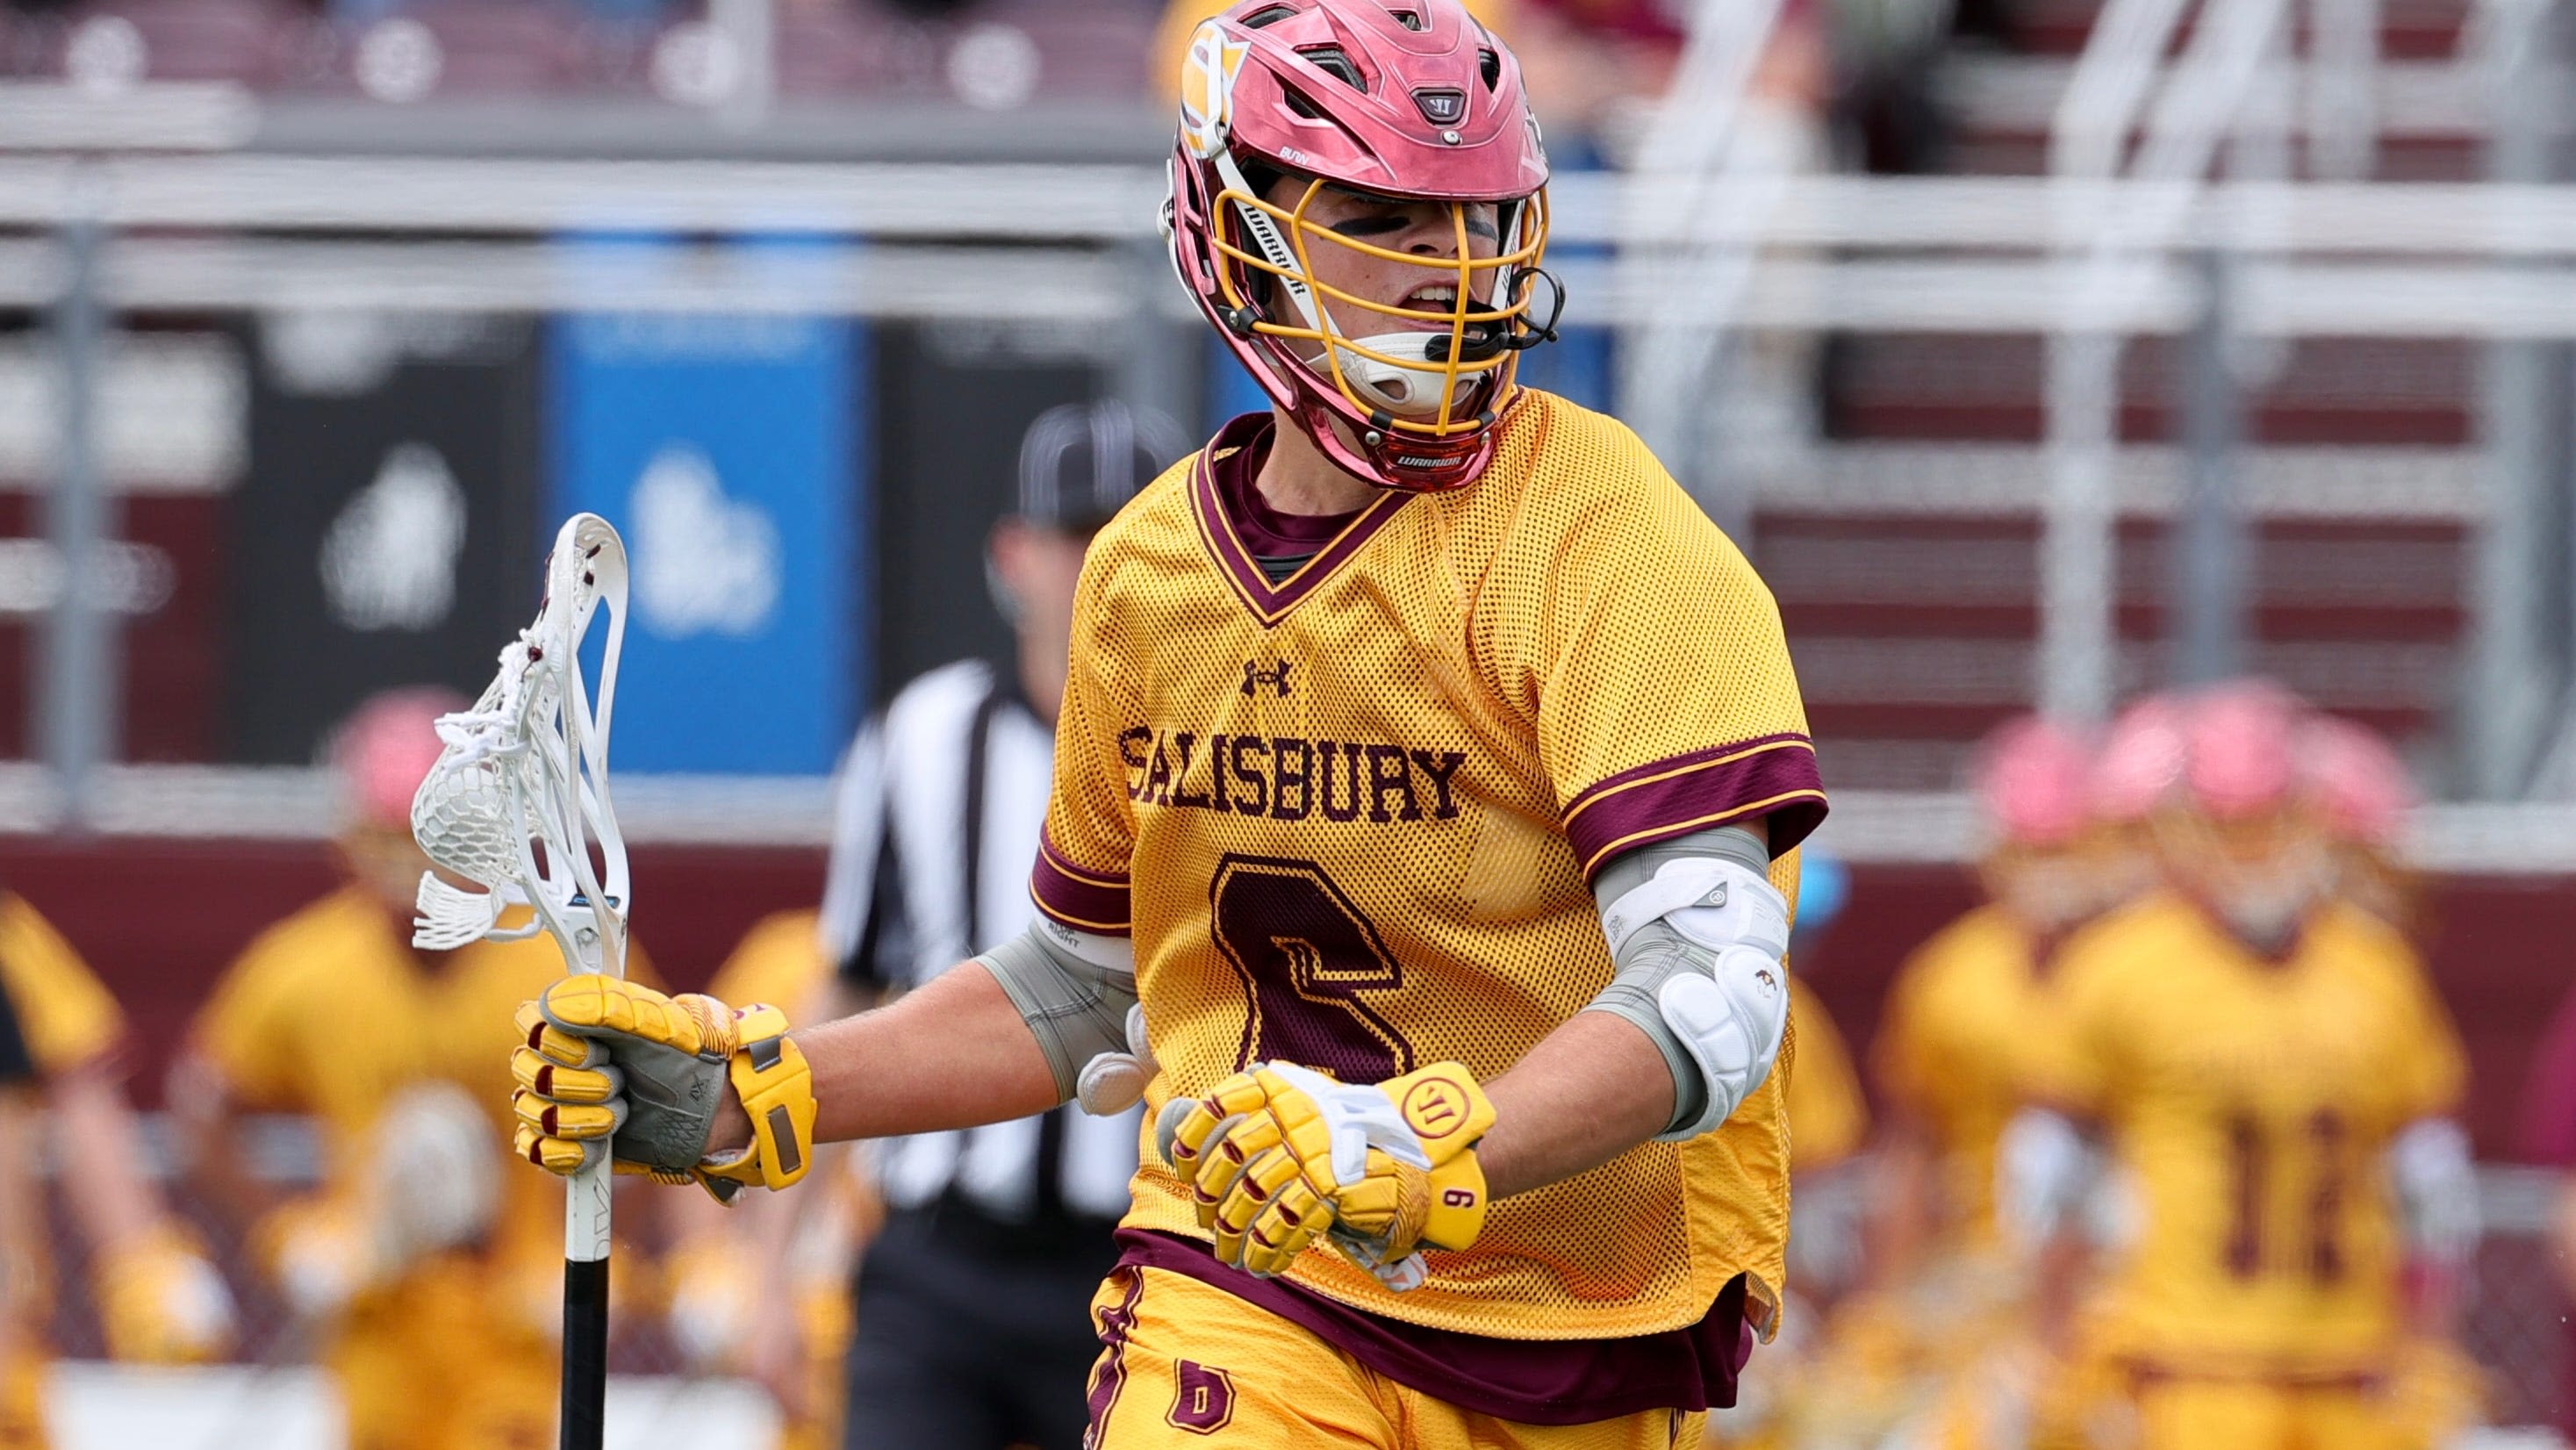 Salisbury University's Bromwell makes SportsCenter Top 10 for lacrosse goal. See it here.